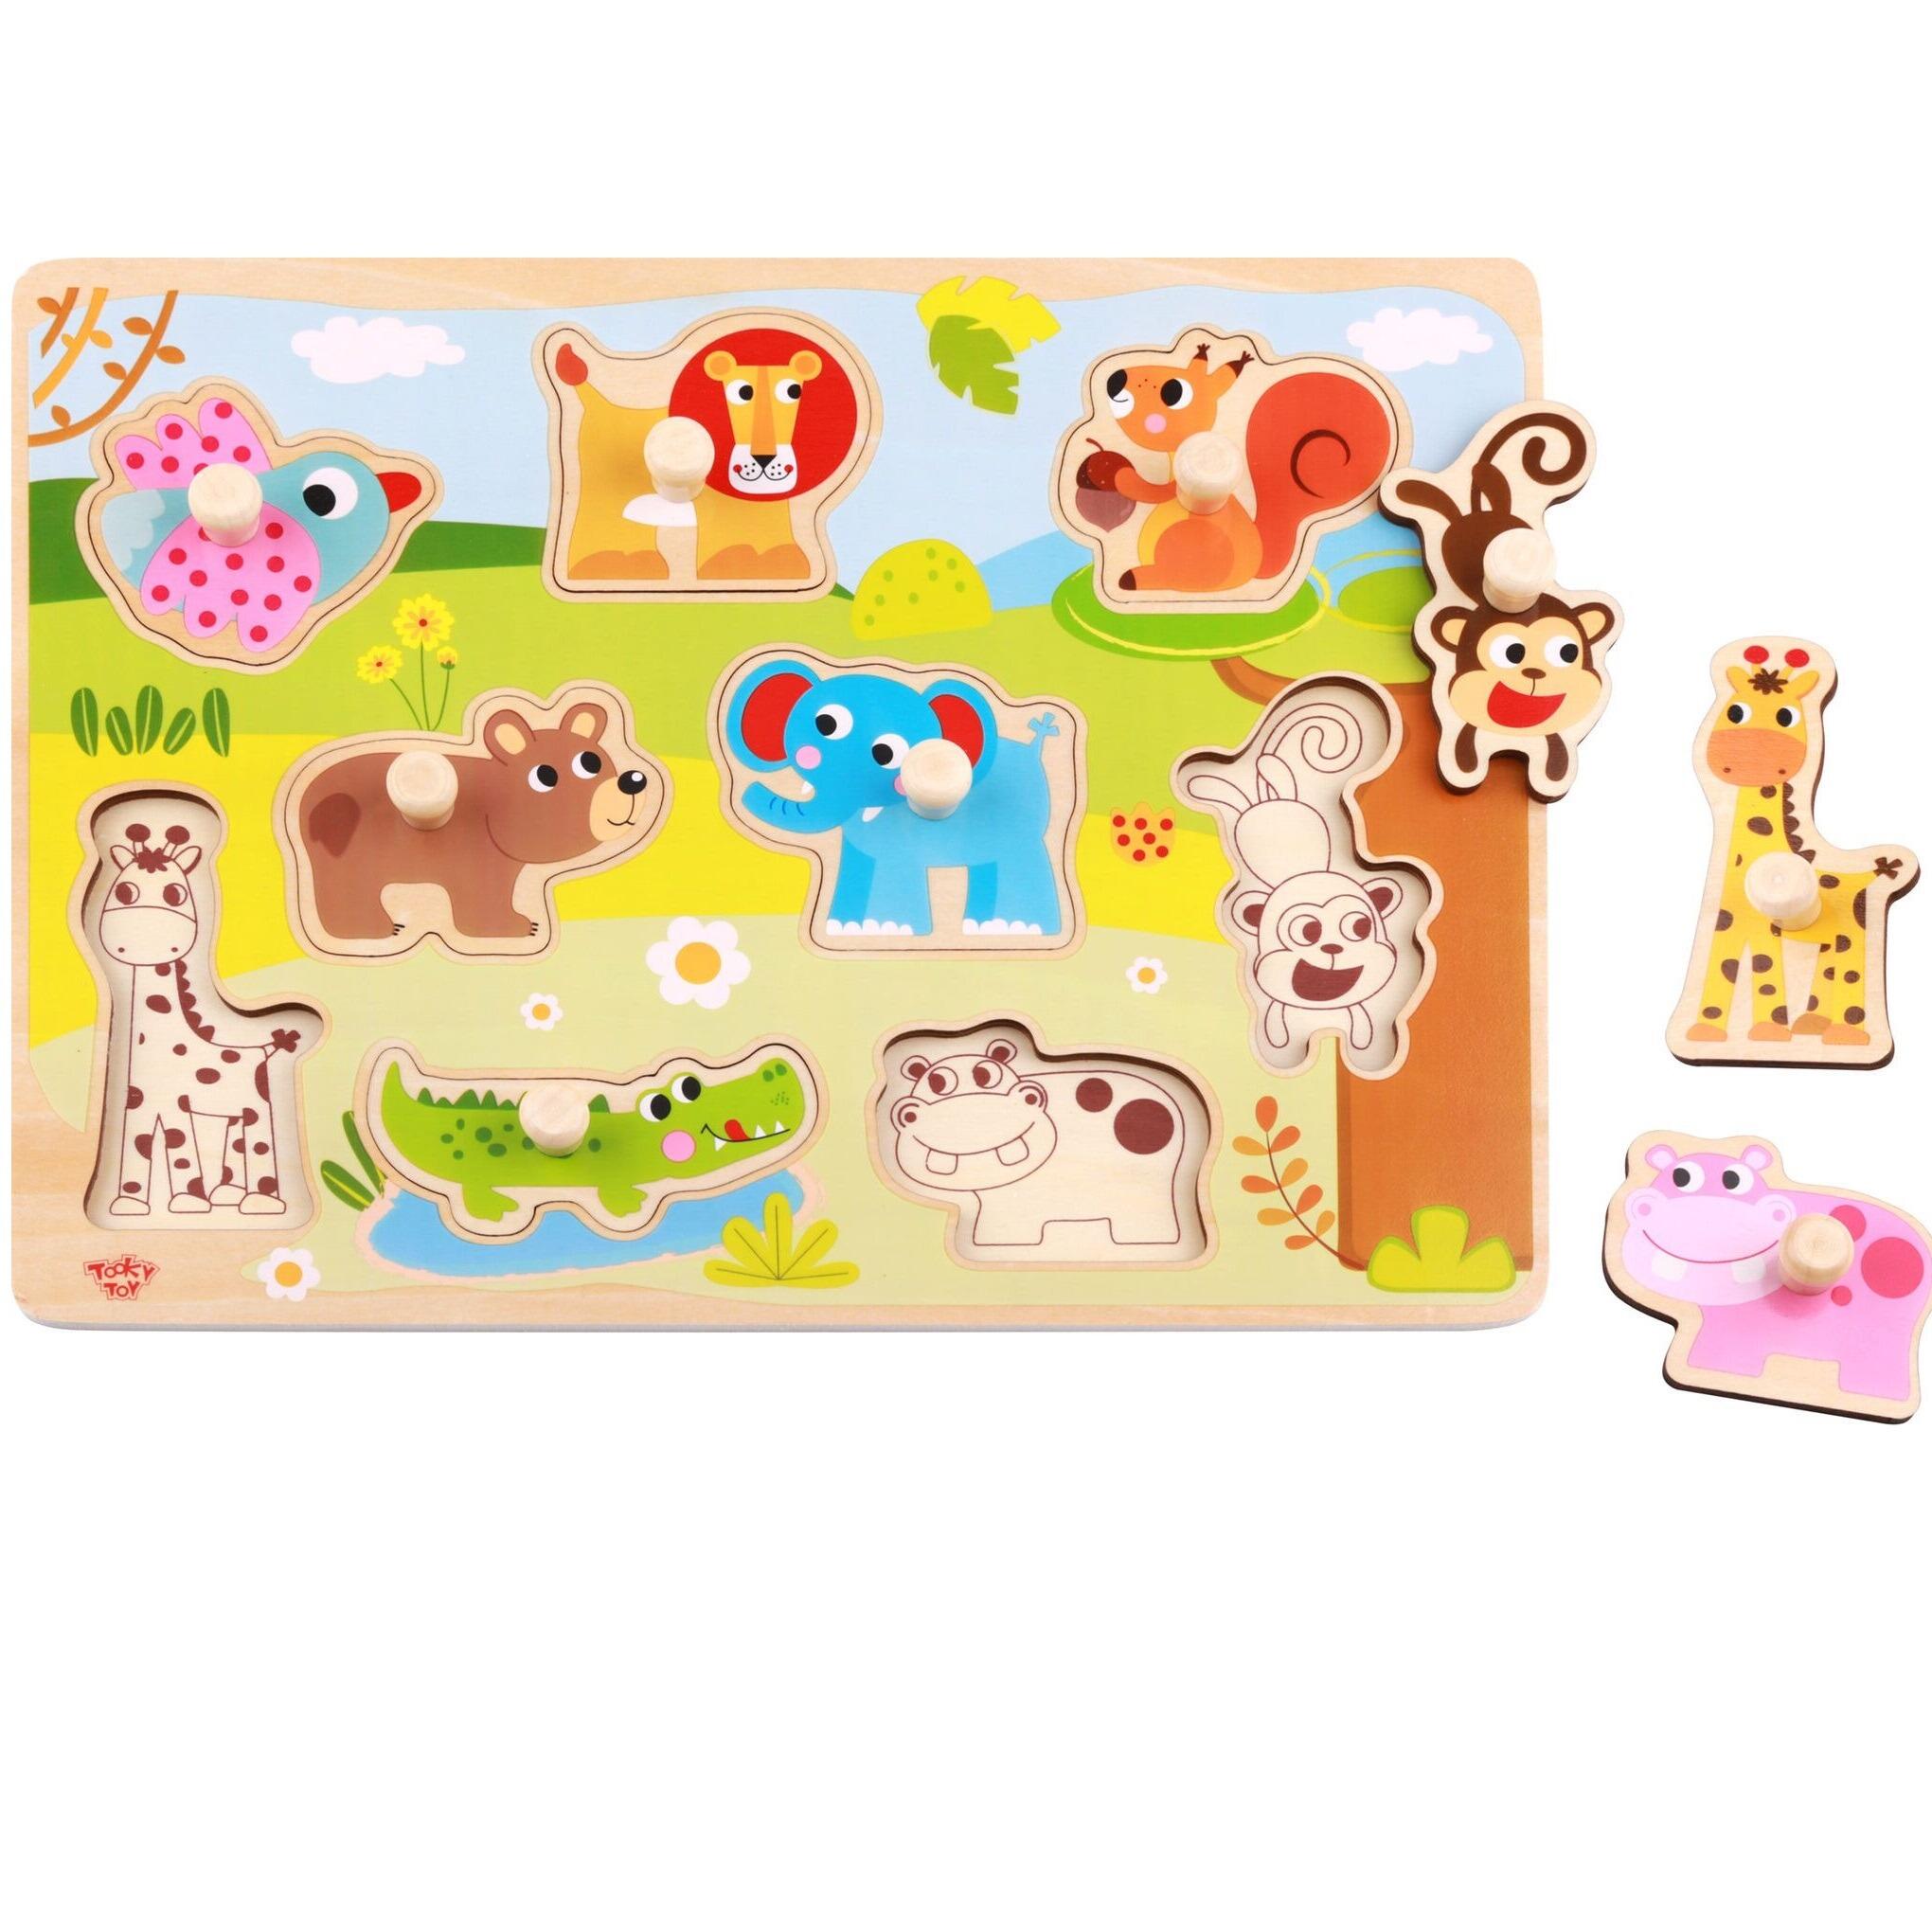 Tooky Toy Wooden 9 Piece Animal Puzzle